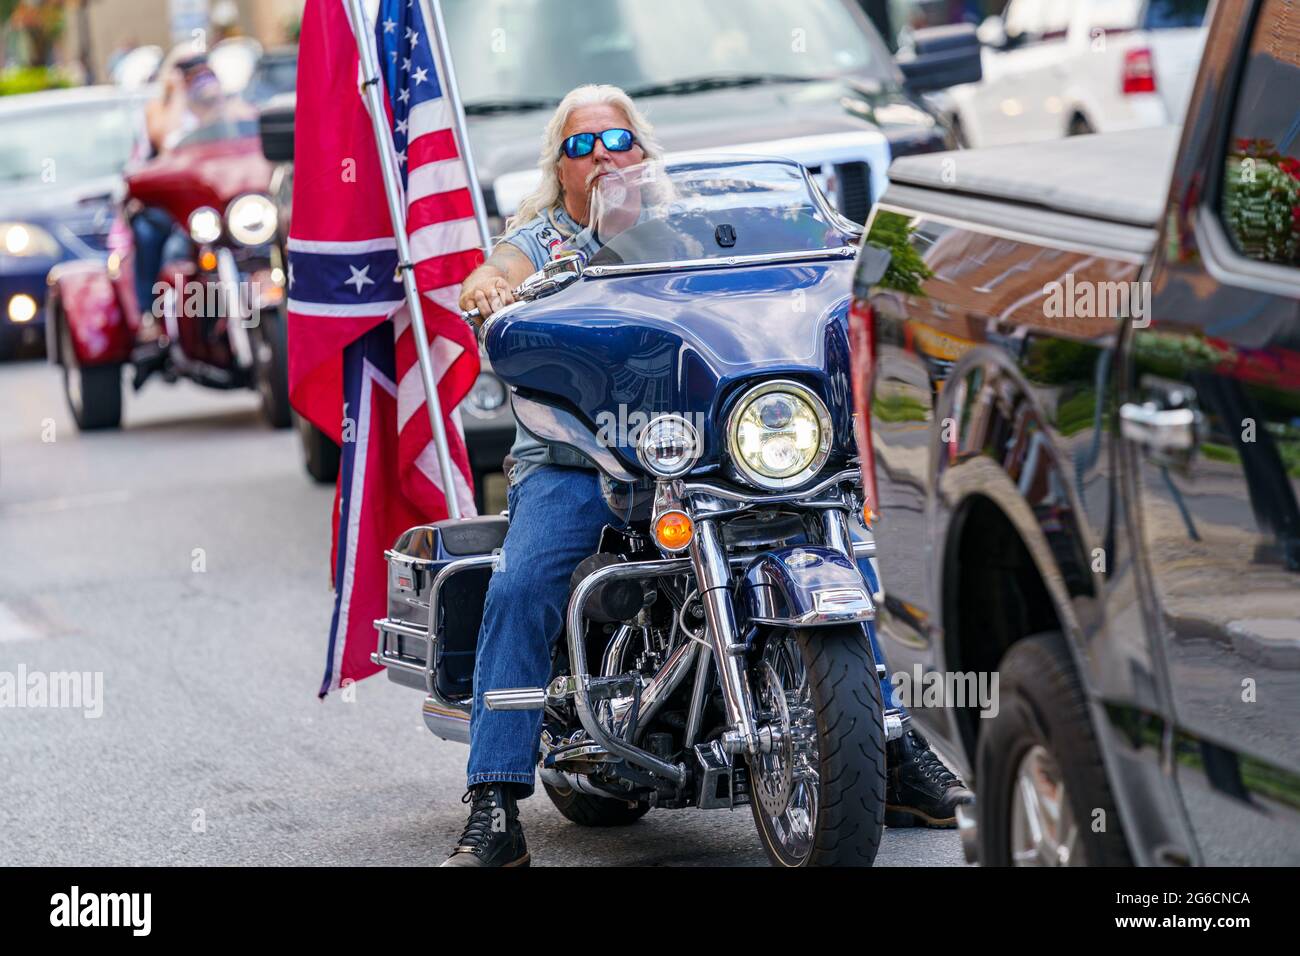 Gettysburg, PA, USA - July 4, 2021: A motorcyclist in the downtown area displaying bot the US and Confederate flags. Stock Photo